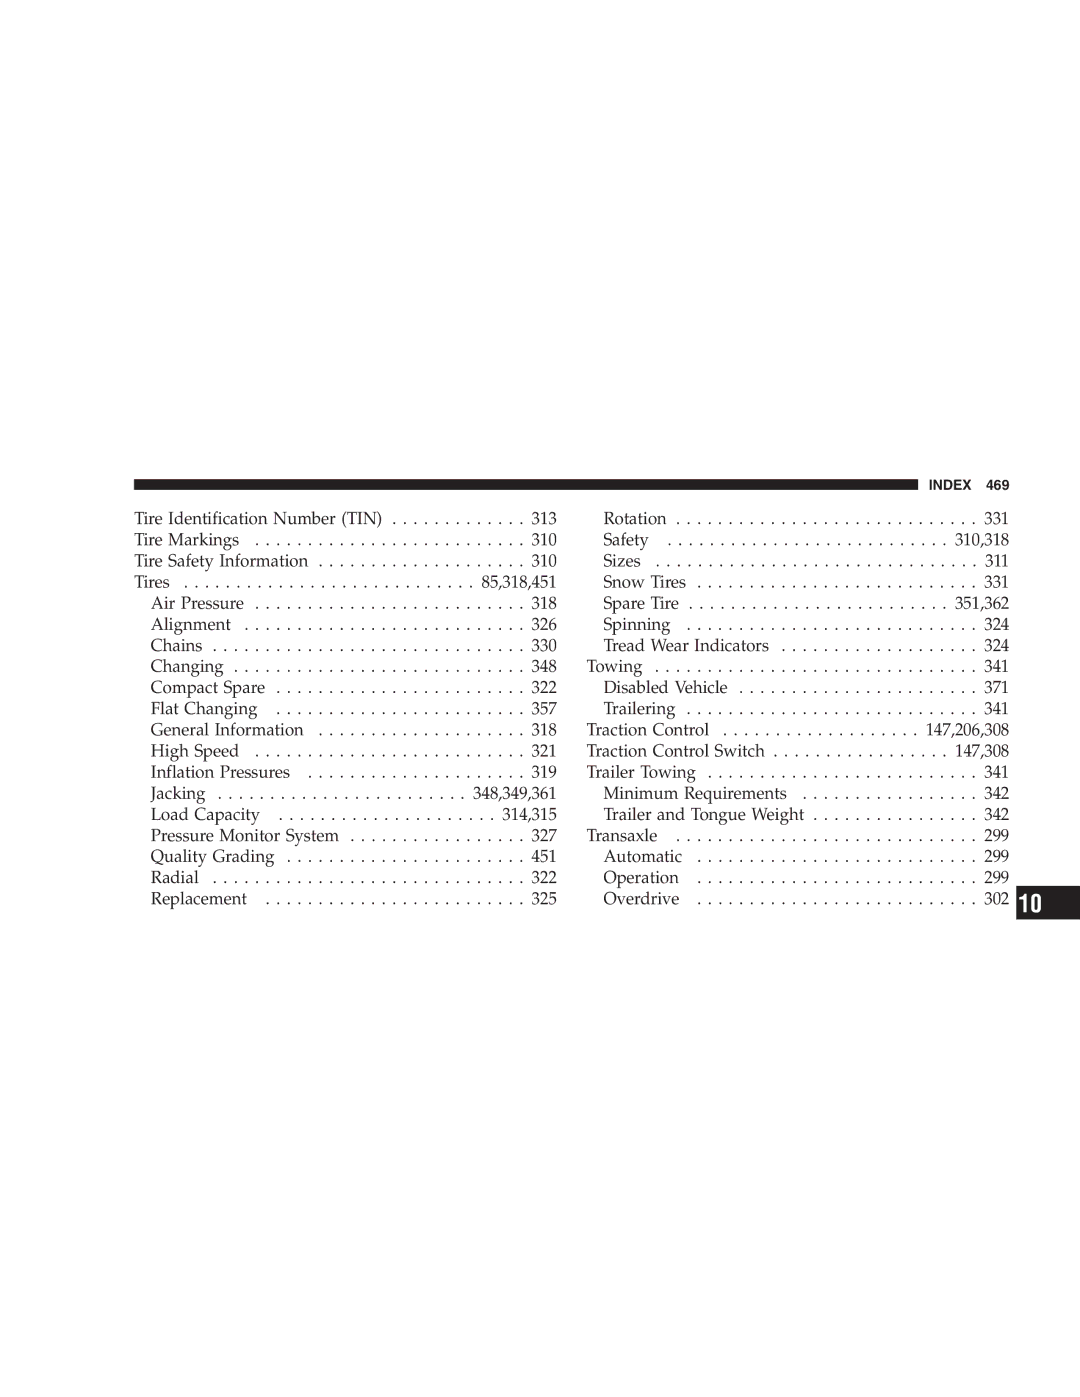 Chrysler 2005 Town and Country manual Index 